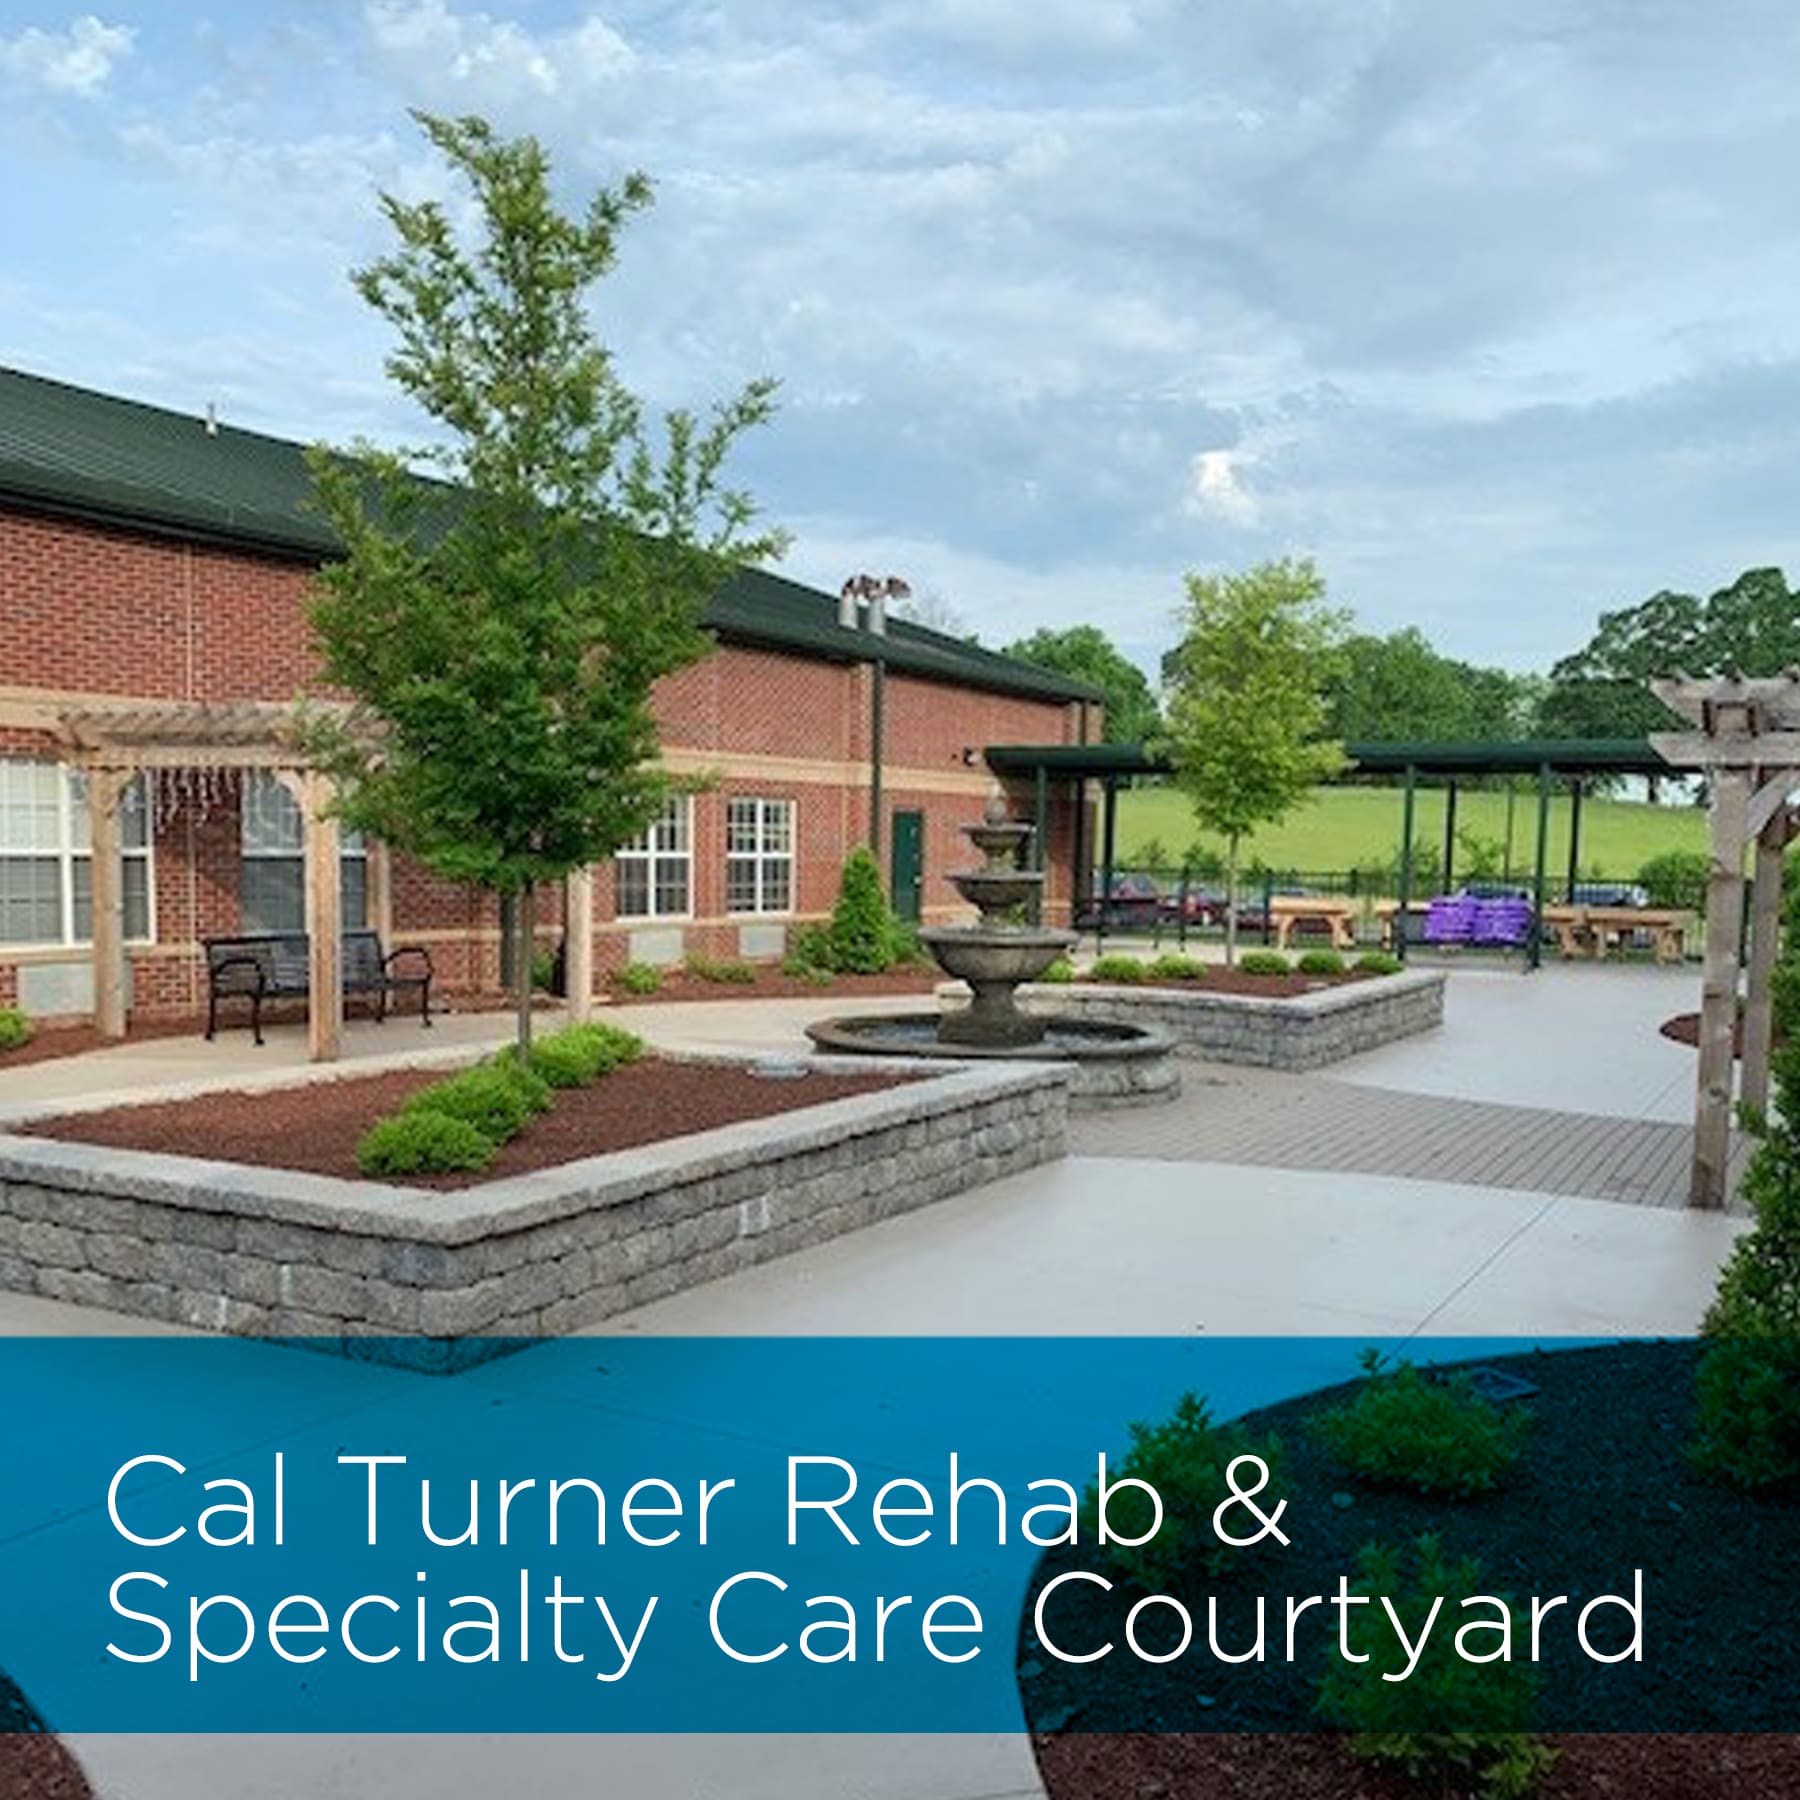 Cal Turner Rehab & Specialty Care Courtyard